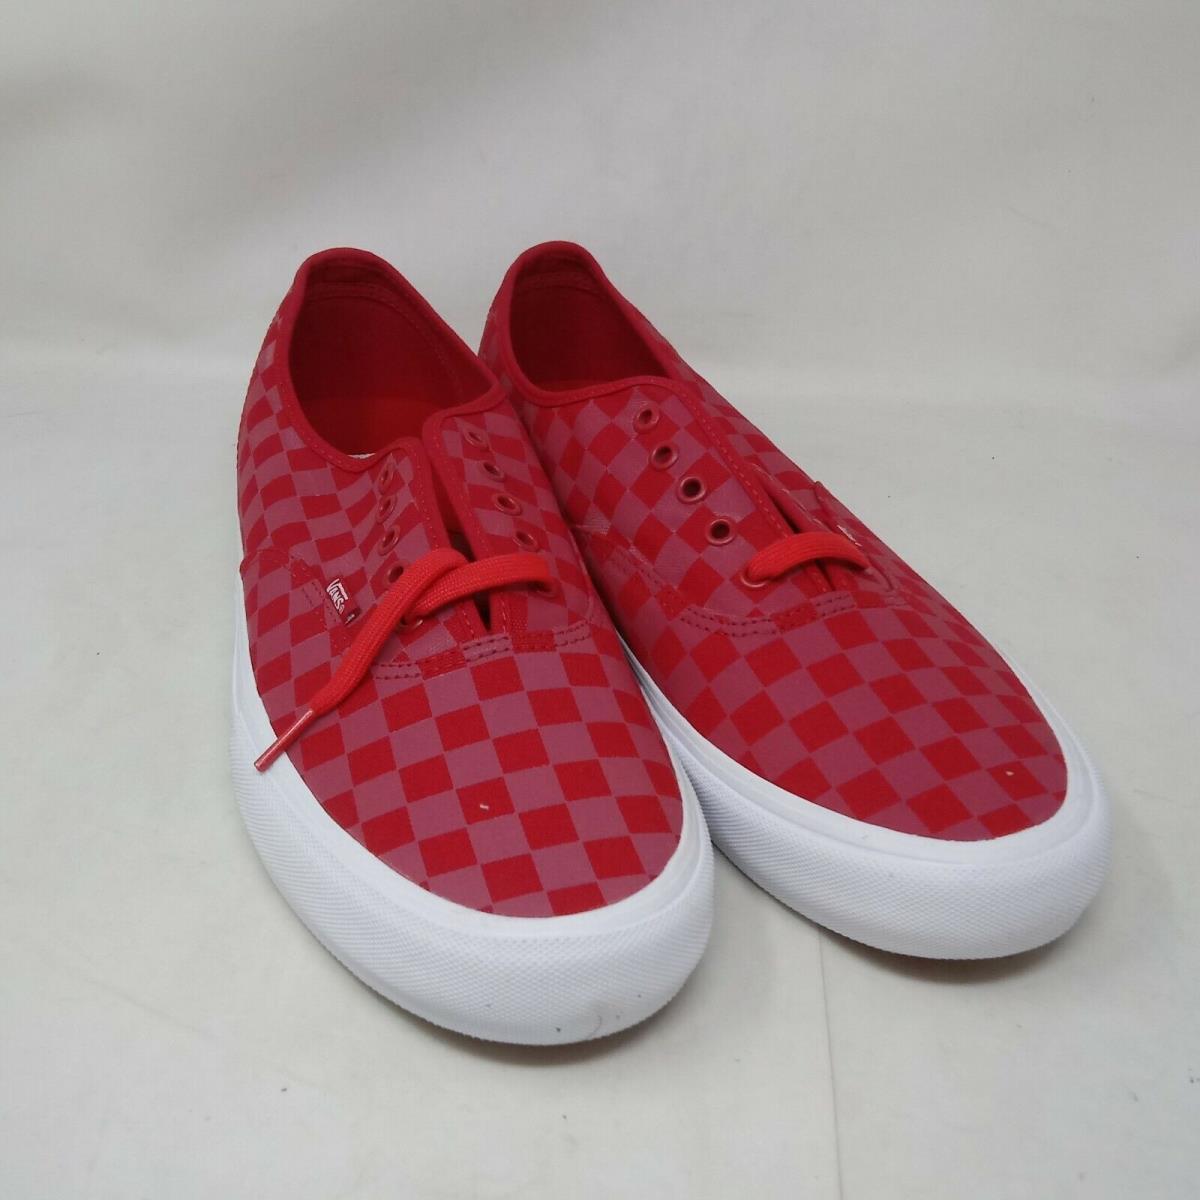 Vans Authentic Pro Reflective Men Pro Reflective Checkerboard Red 13.0 VN0A3479T0C VN-015